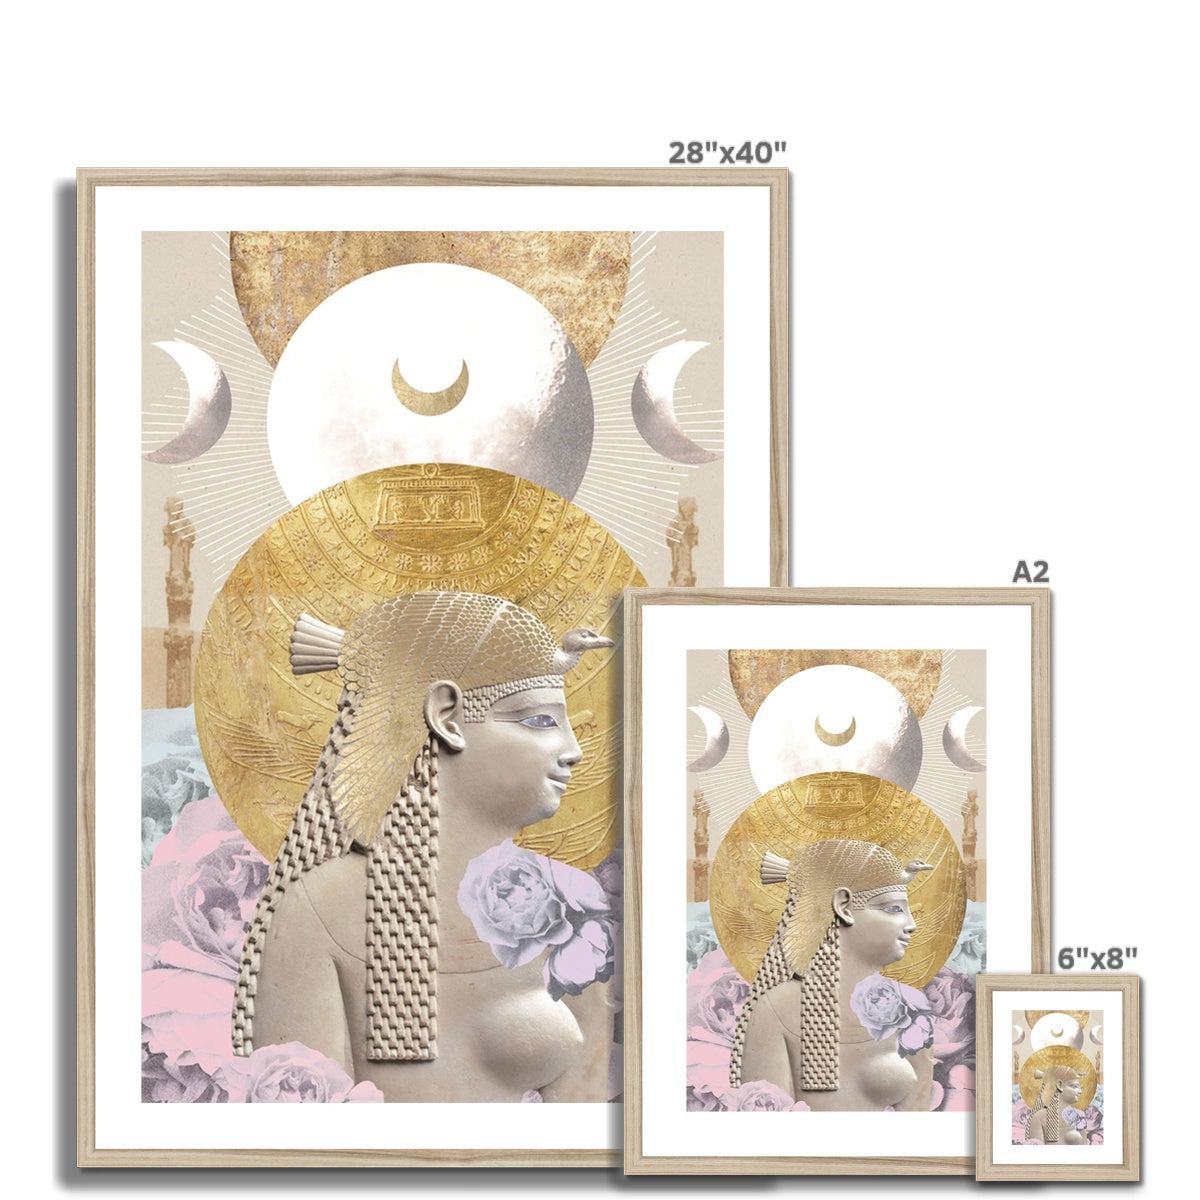 The Goddess Framed & Mounted Print - Starseed Designs Inc.